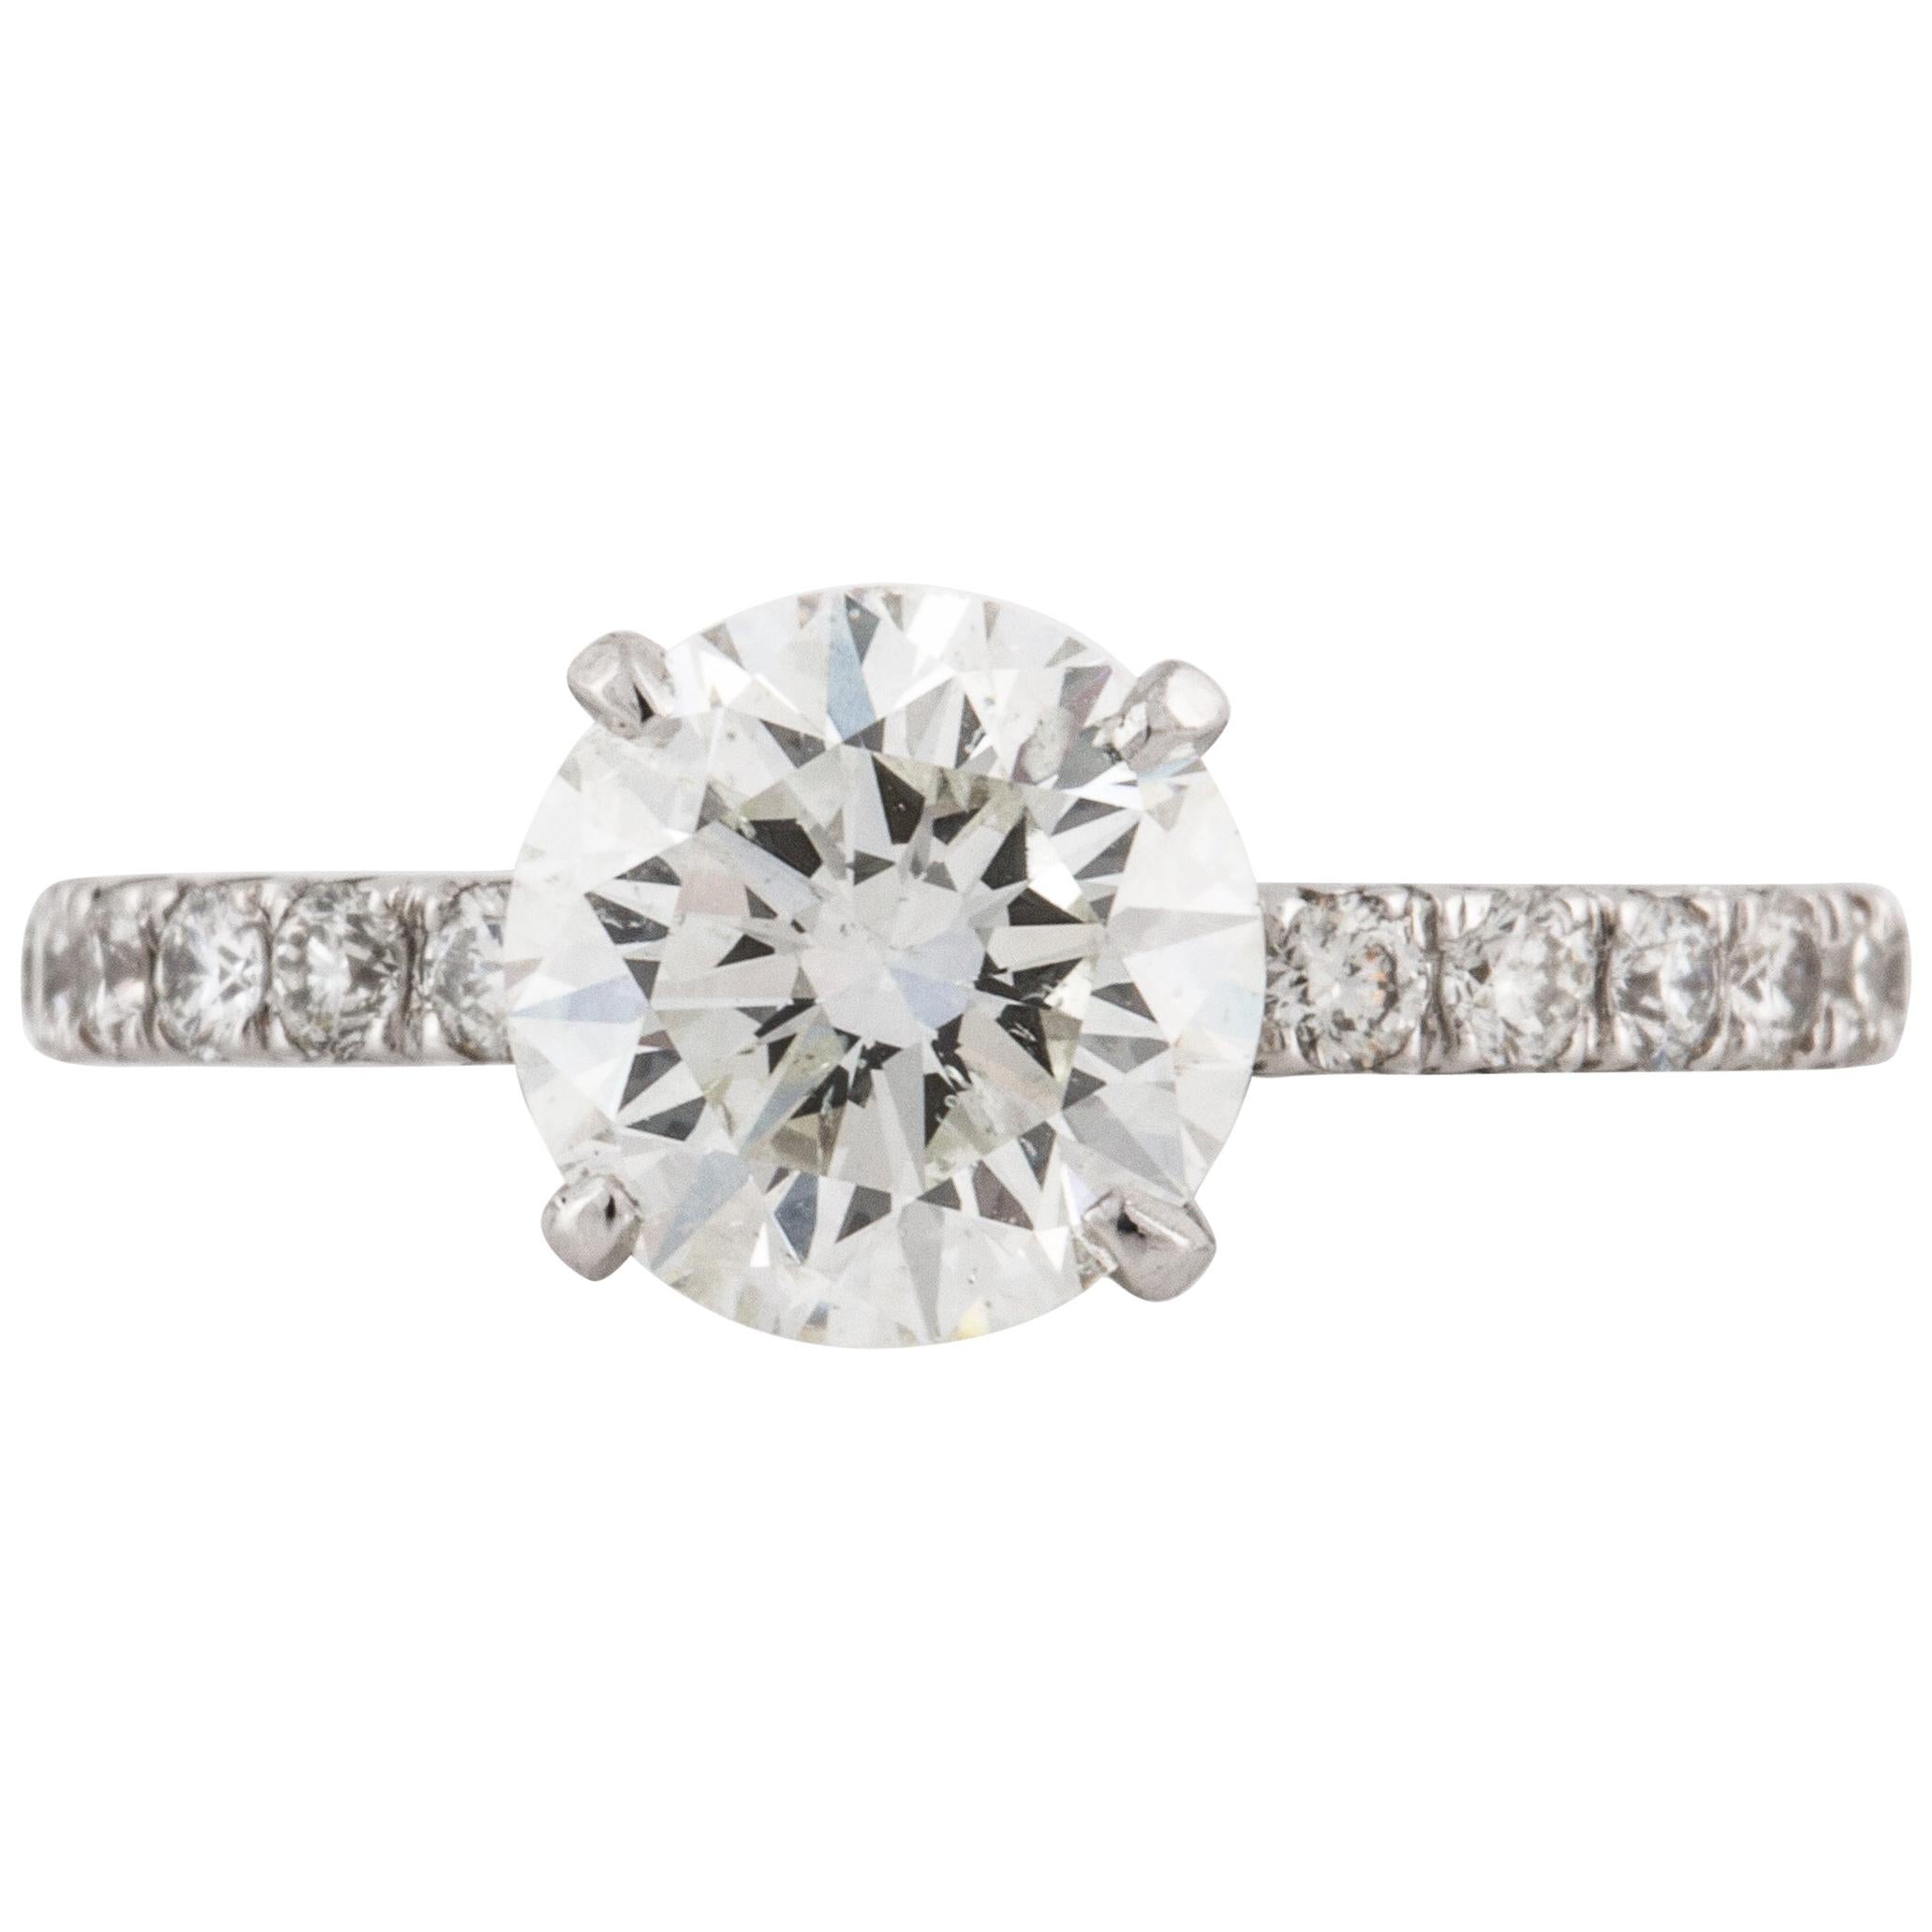 GIA Certified 1.08 Carat Diamond Solitaire Ring